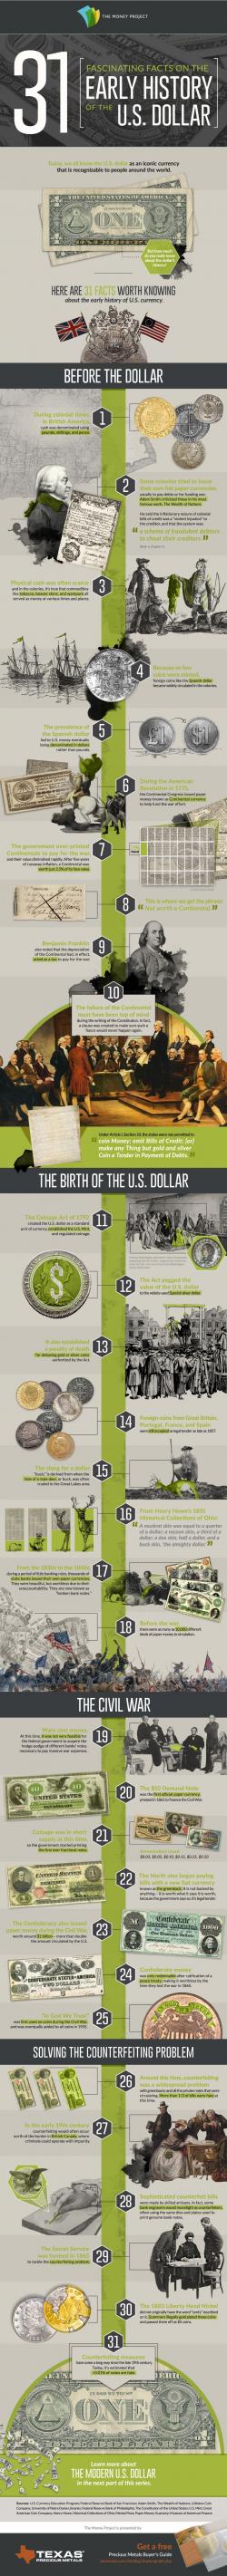 31 Fascinating Facts On The Early History Of The US Dollar